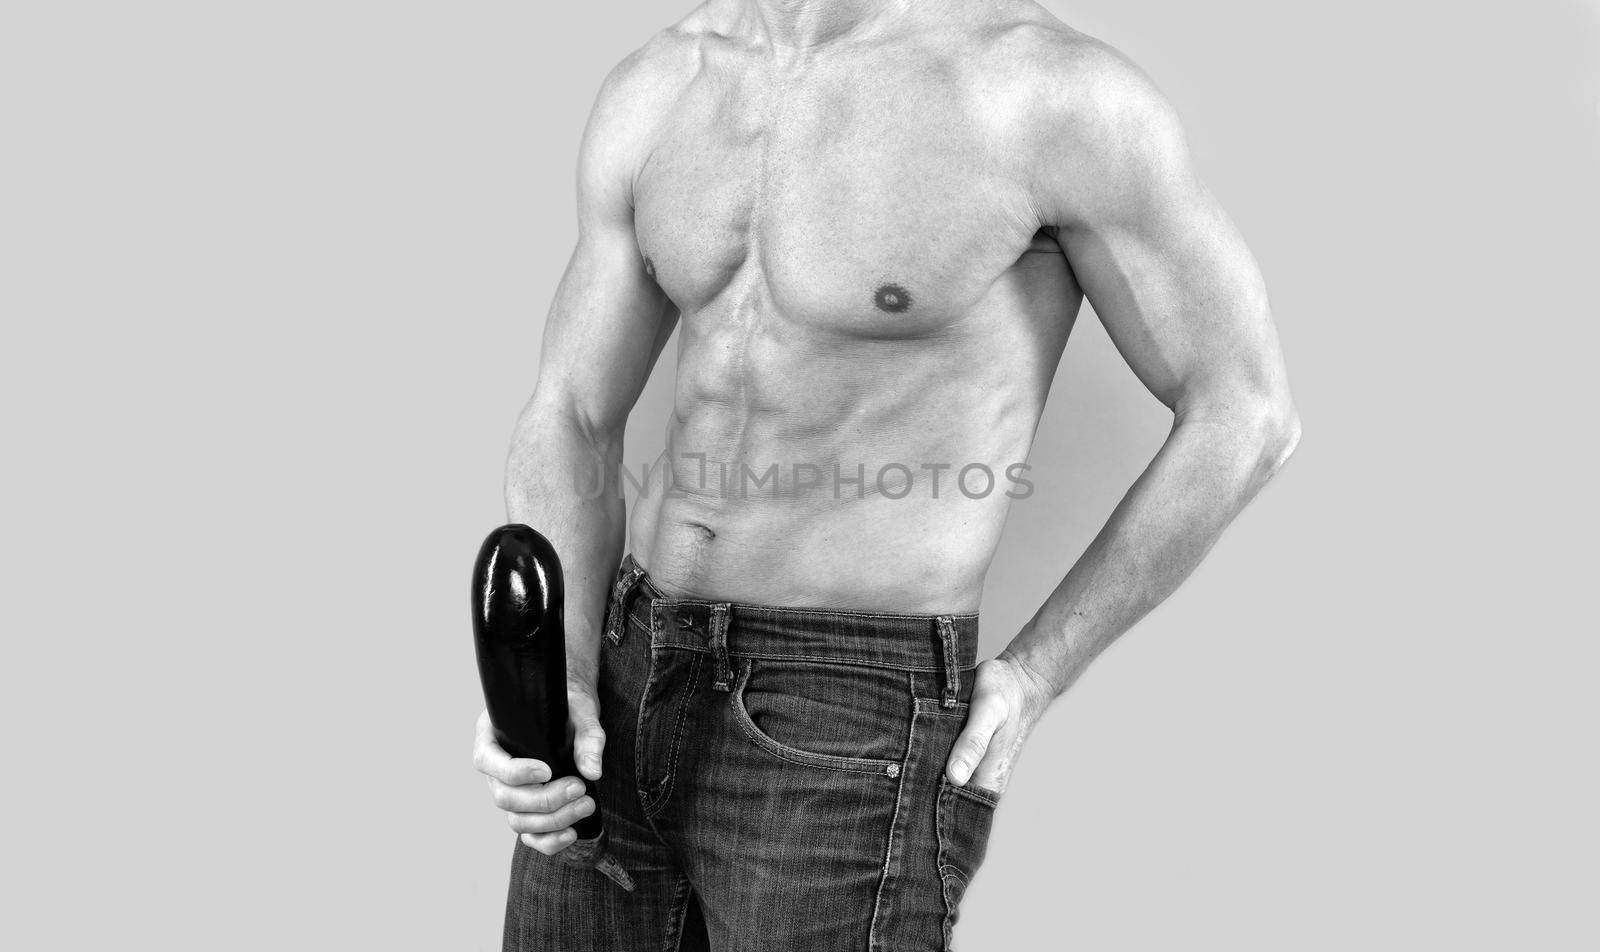 Muscular man with six pack abs torso cropped view hold firm and large eggplant at crotch level grey background, penis enlargement.